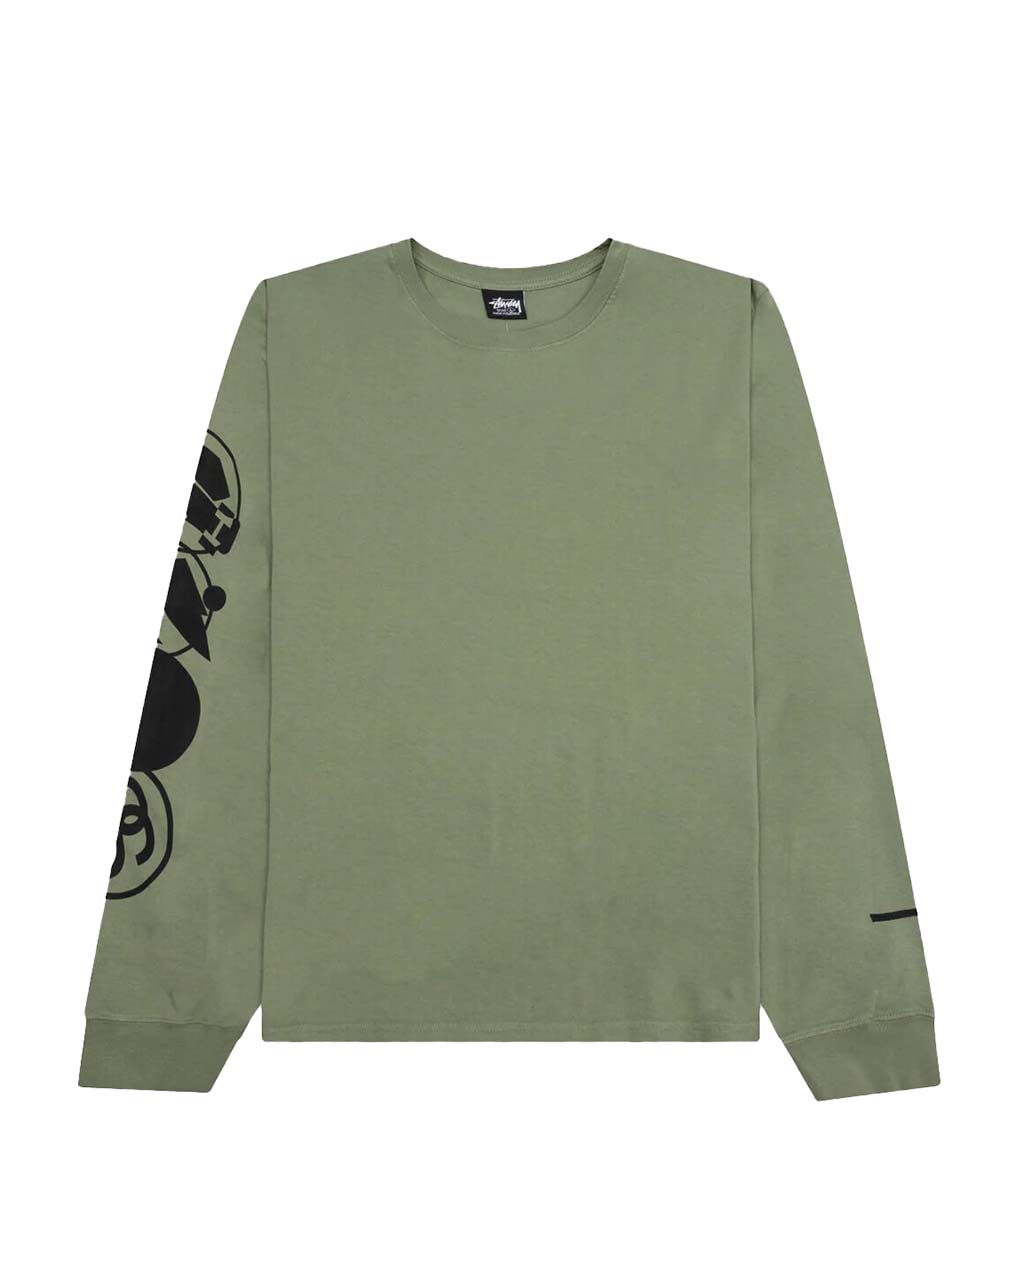 Stüssy Stacked Pigment Dyed LS Tee